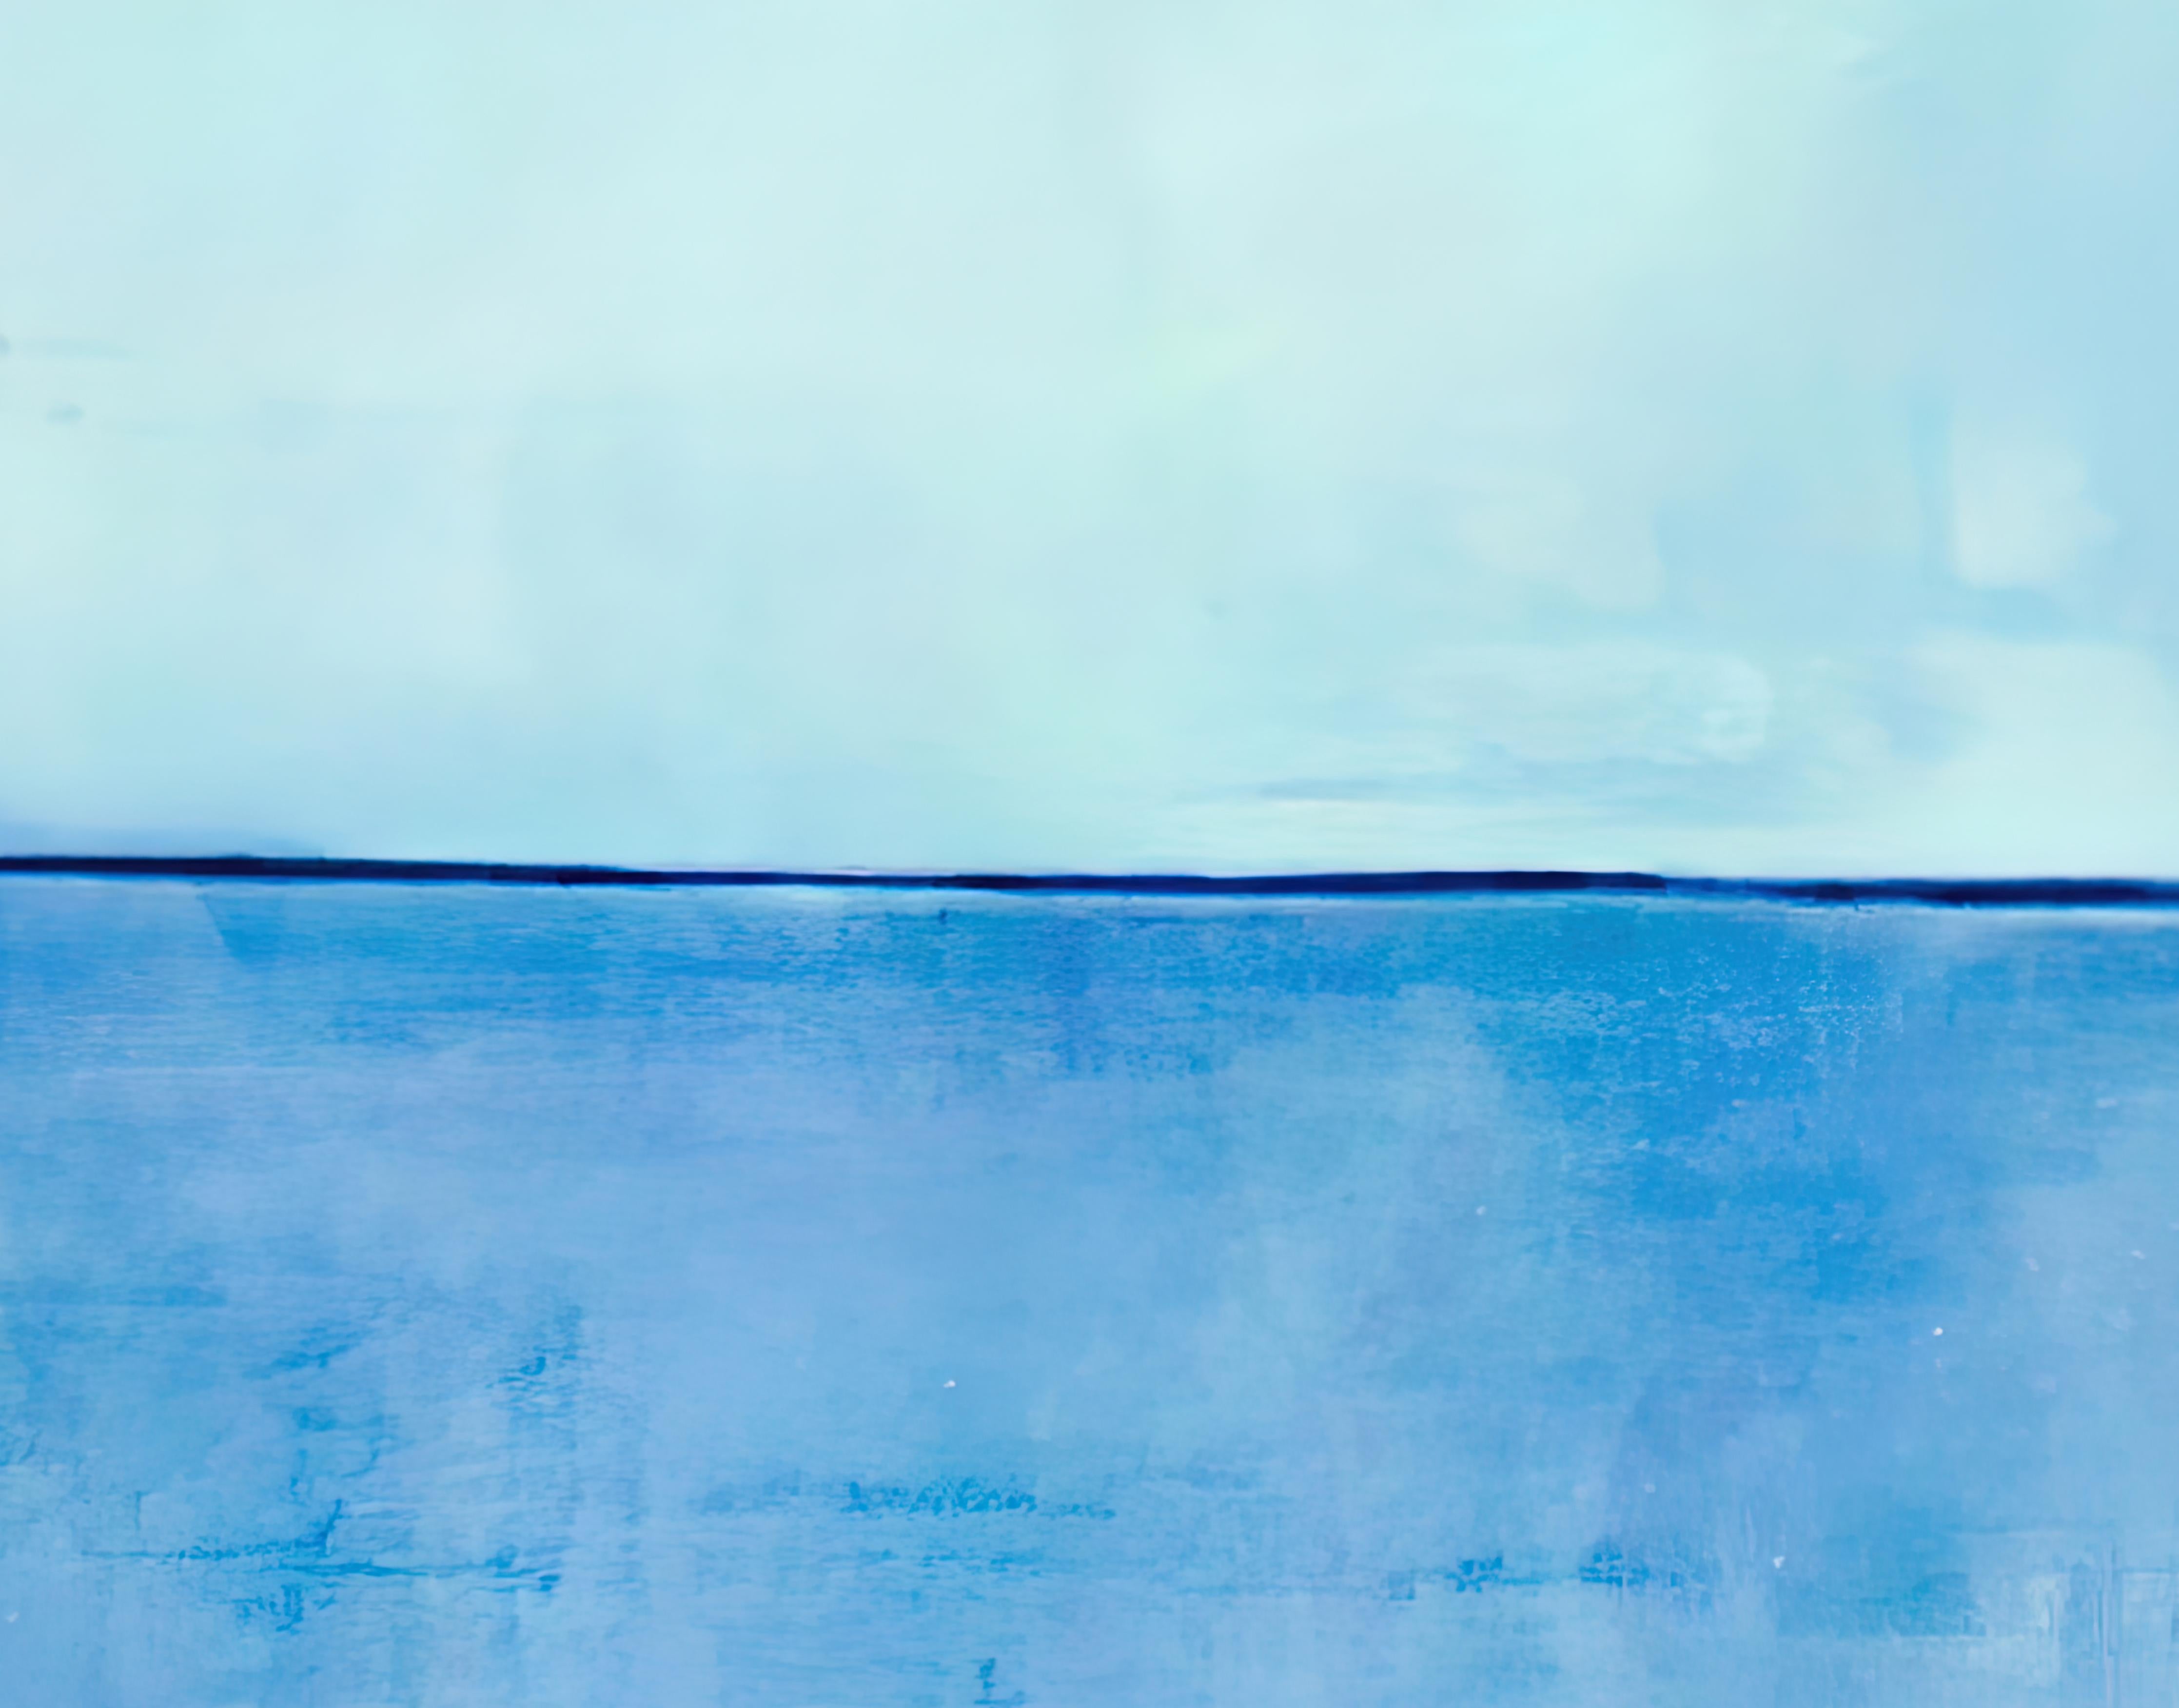 rothko blue divided by blue